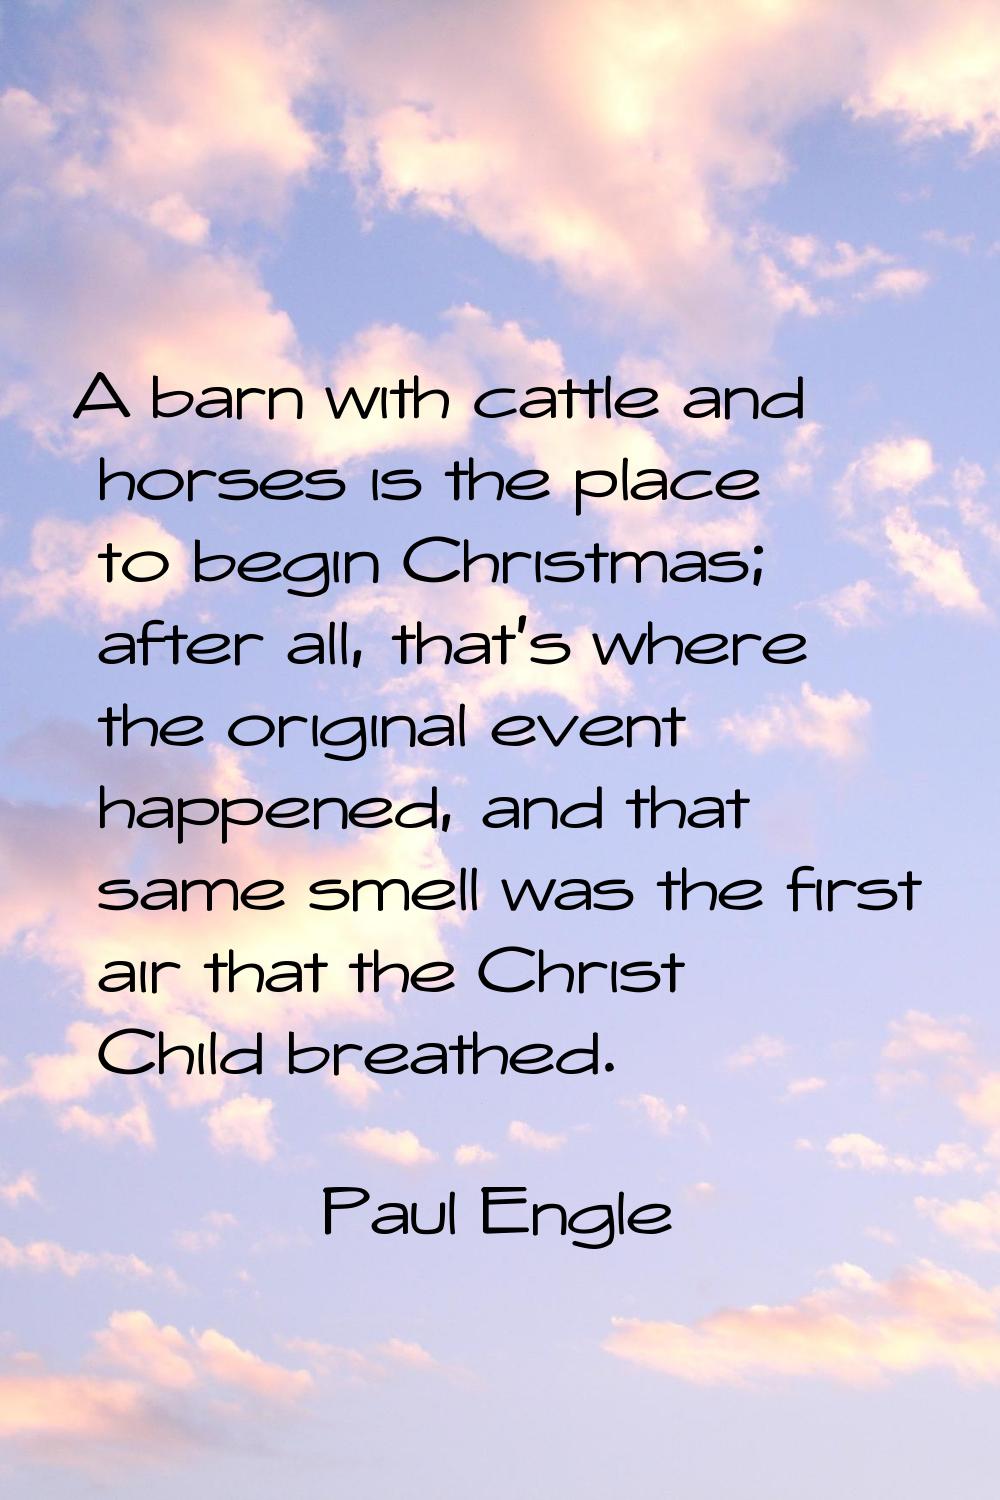 A barn with cattle and horses is the place to begin Christmas; after all, that's where the original